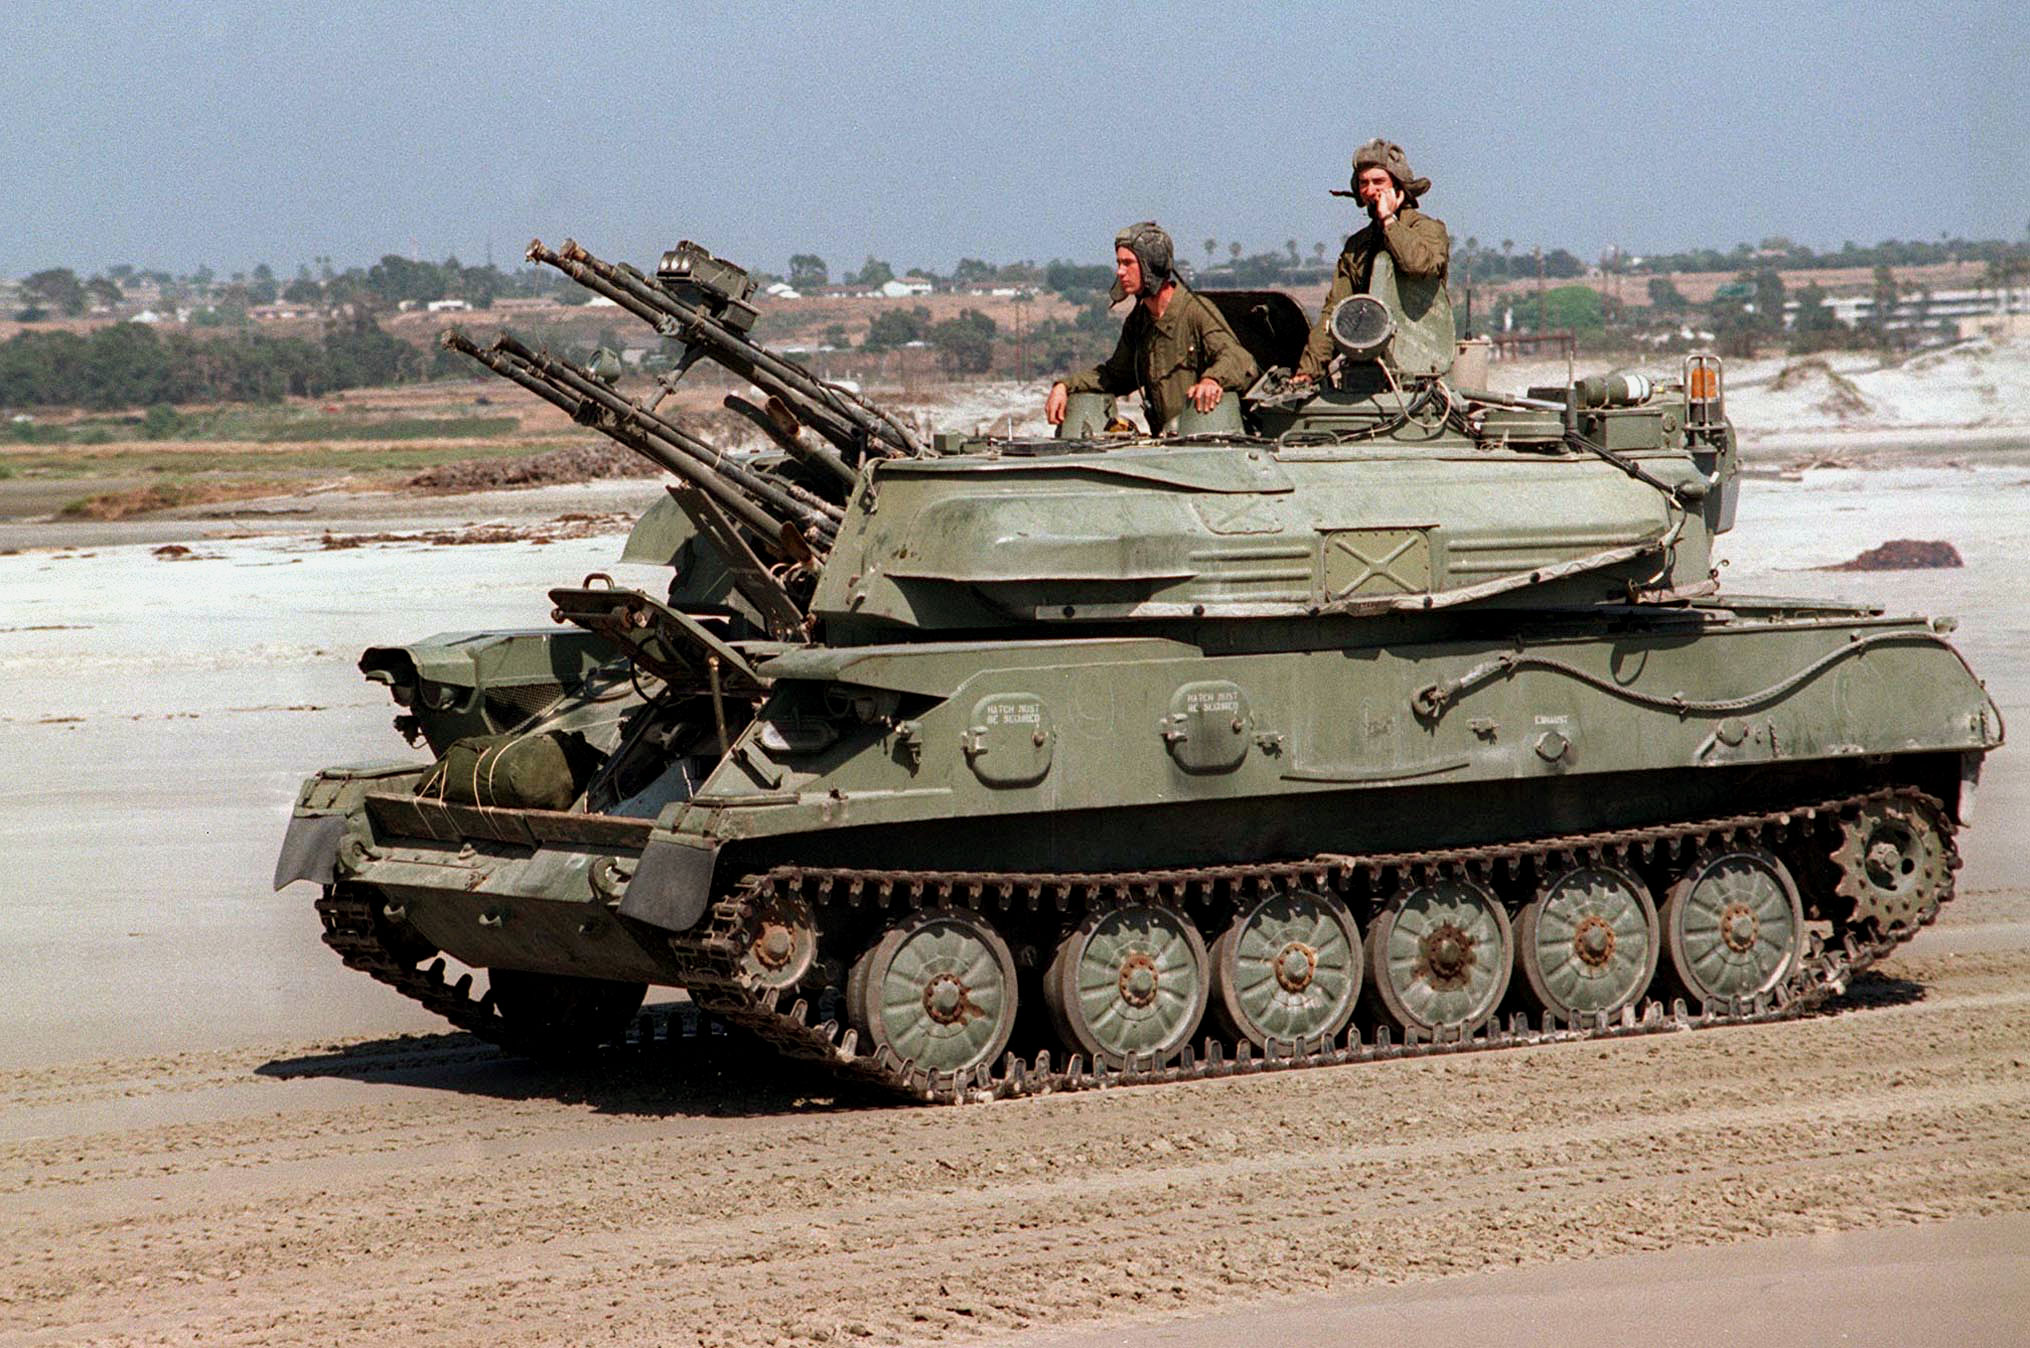 Tanks are large type of armored fighting vehicle with tracks